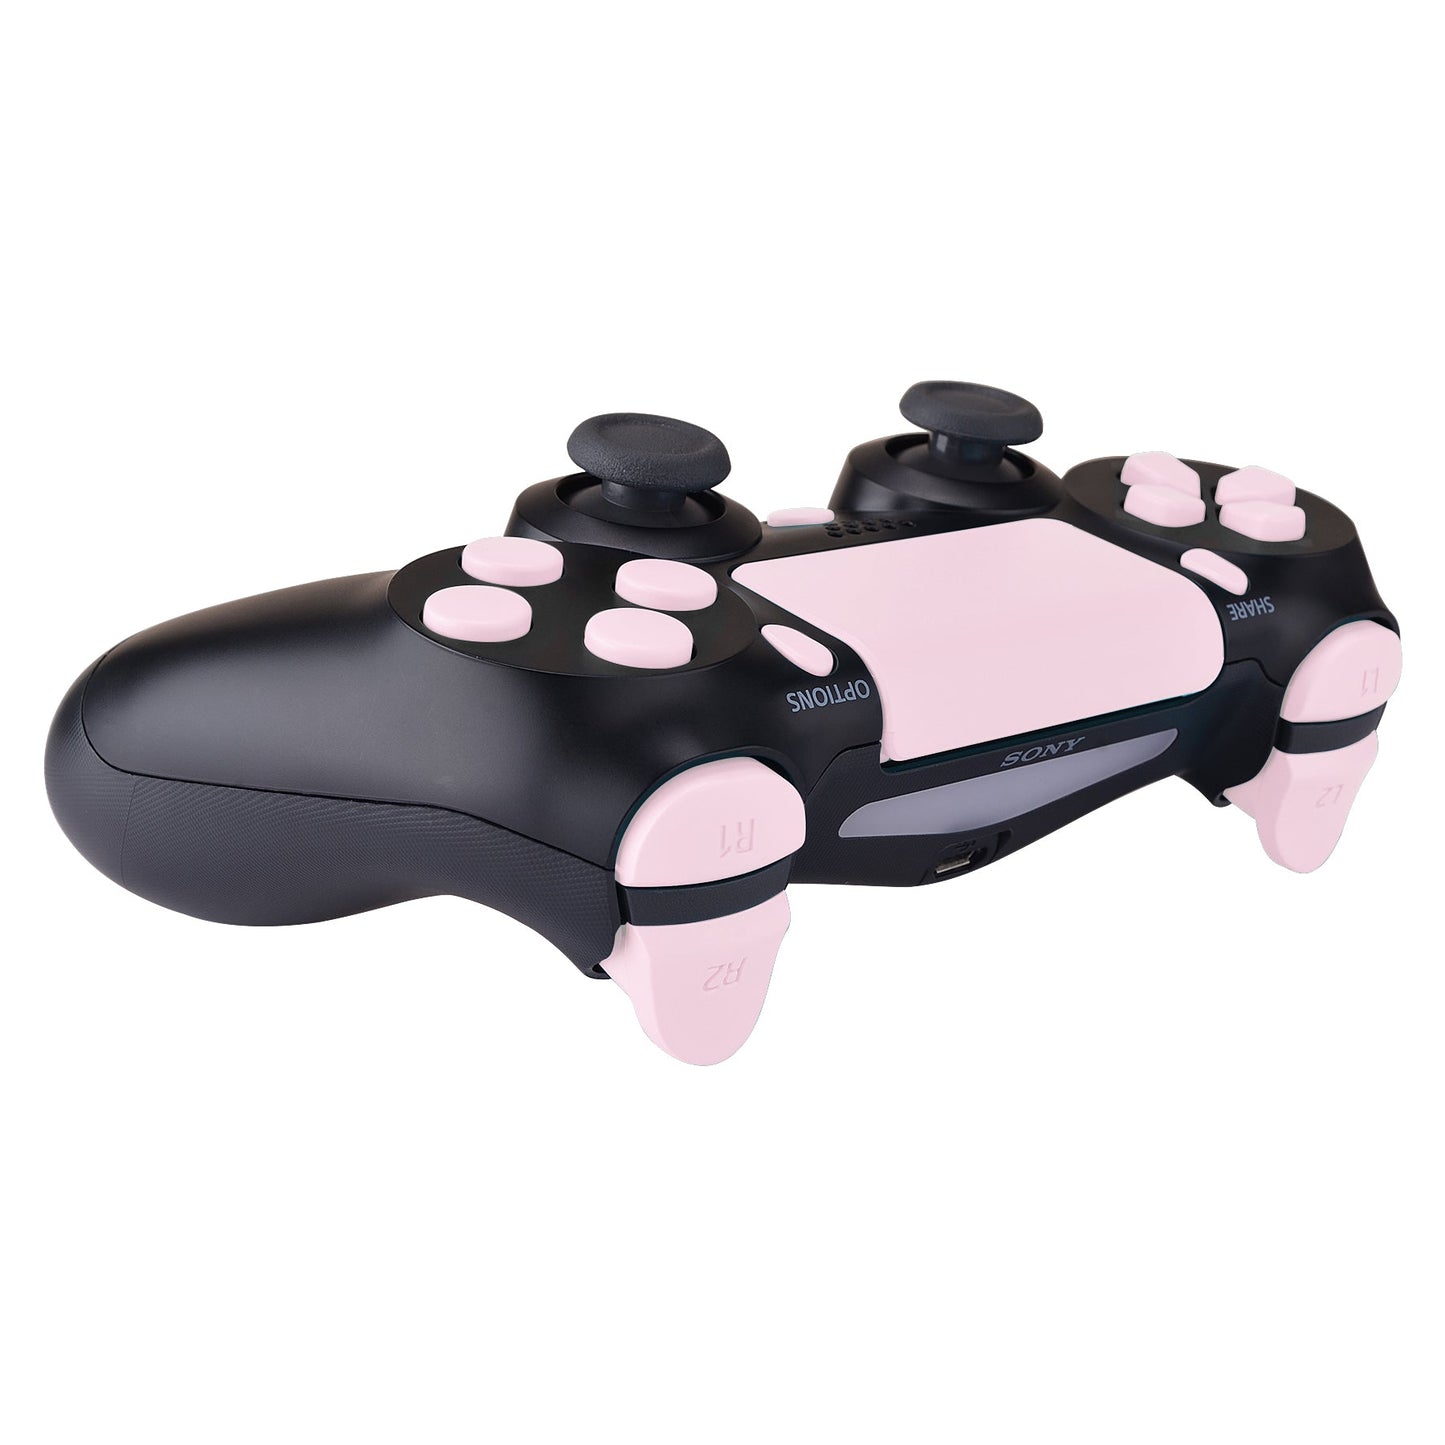 eXtremeRate Controller ps4 eXtremeRate Buttons Blossoms Options Full Buttons R1 Kit Slim Repair Pro Share Touchpad Action – Triggers Controller, Pink for L1 Set Cherry ps4 D-pad Home R2 L2 Replacement for